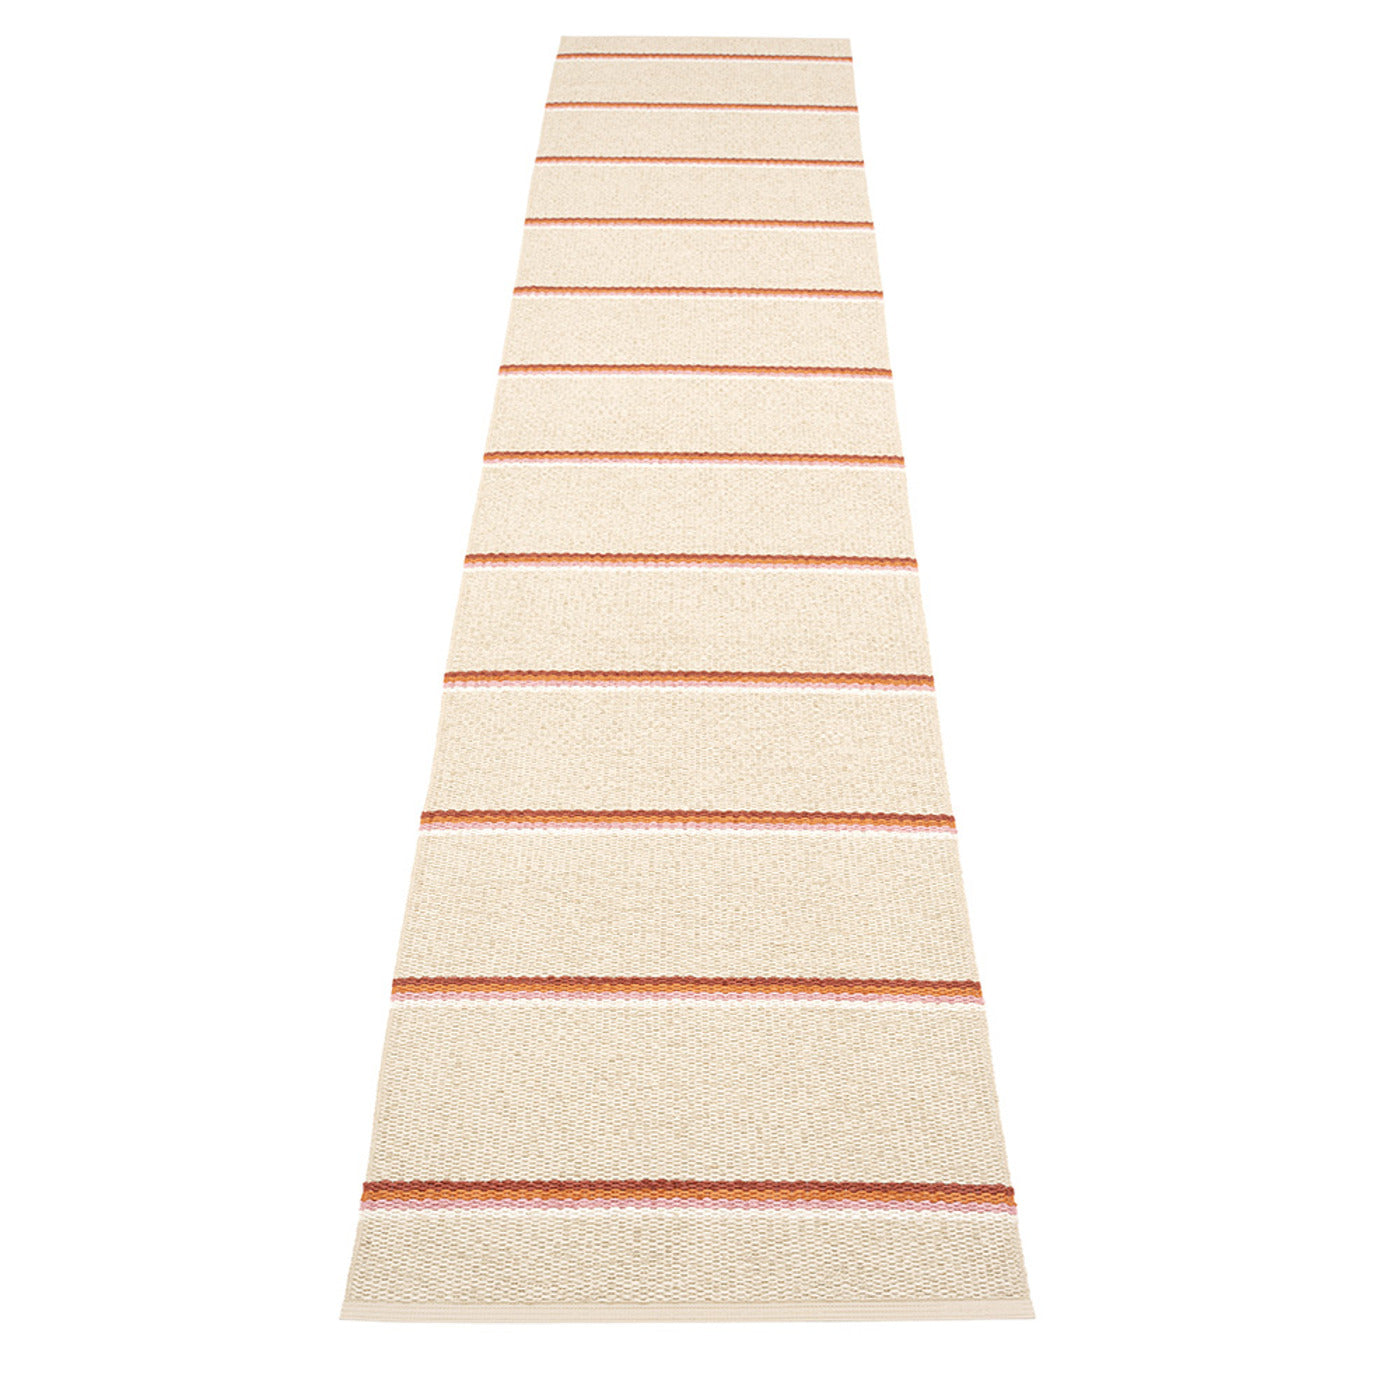 All sizes OLLE RUG - Brick